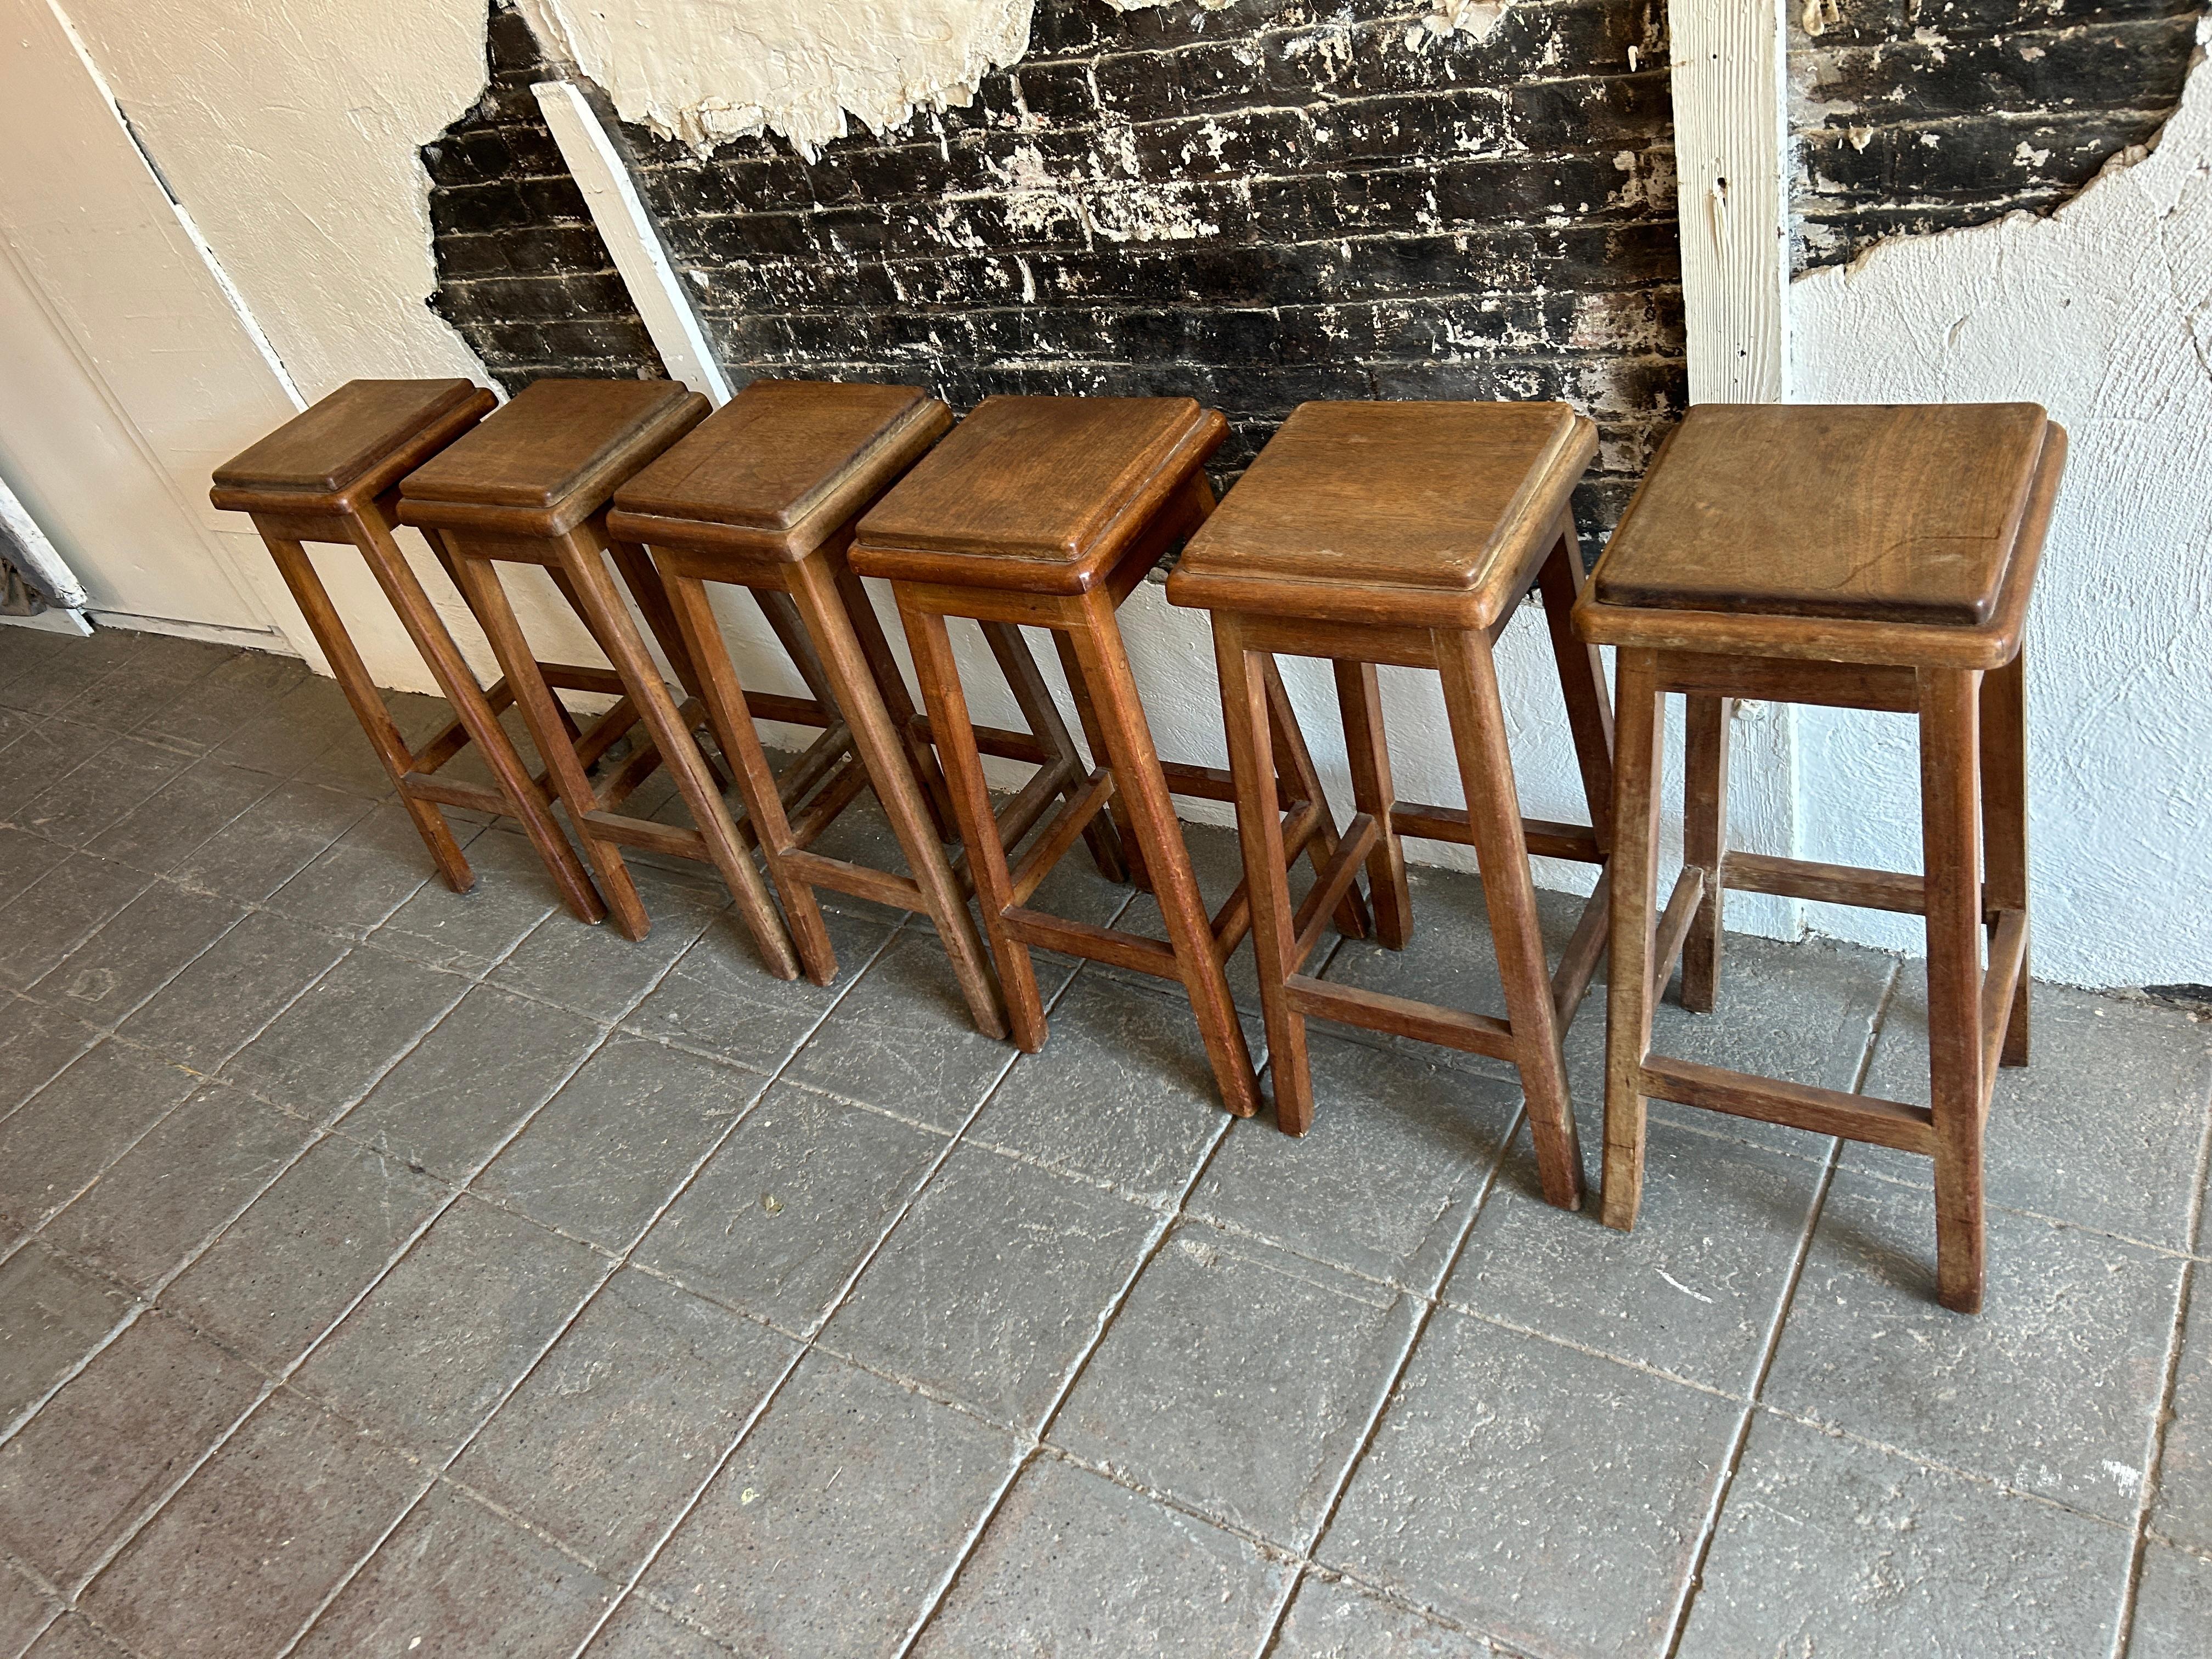 Stunning Set of 6 Mid-Century Modern studio Craft Simple solid walnut Square bar stools. Stools are all Matching show signs of use and patina, all stools are Super solid and Sturdy. Great matching set of 6 Stools. Made in the USA circa 1950. Located